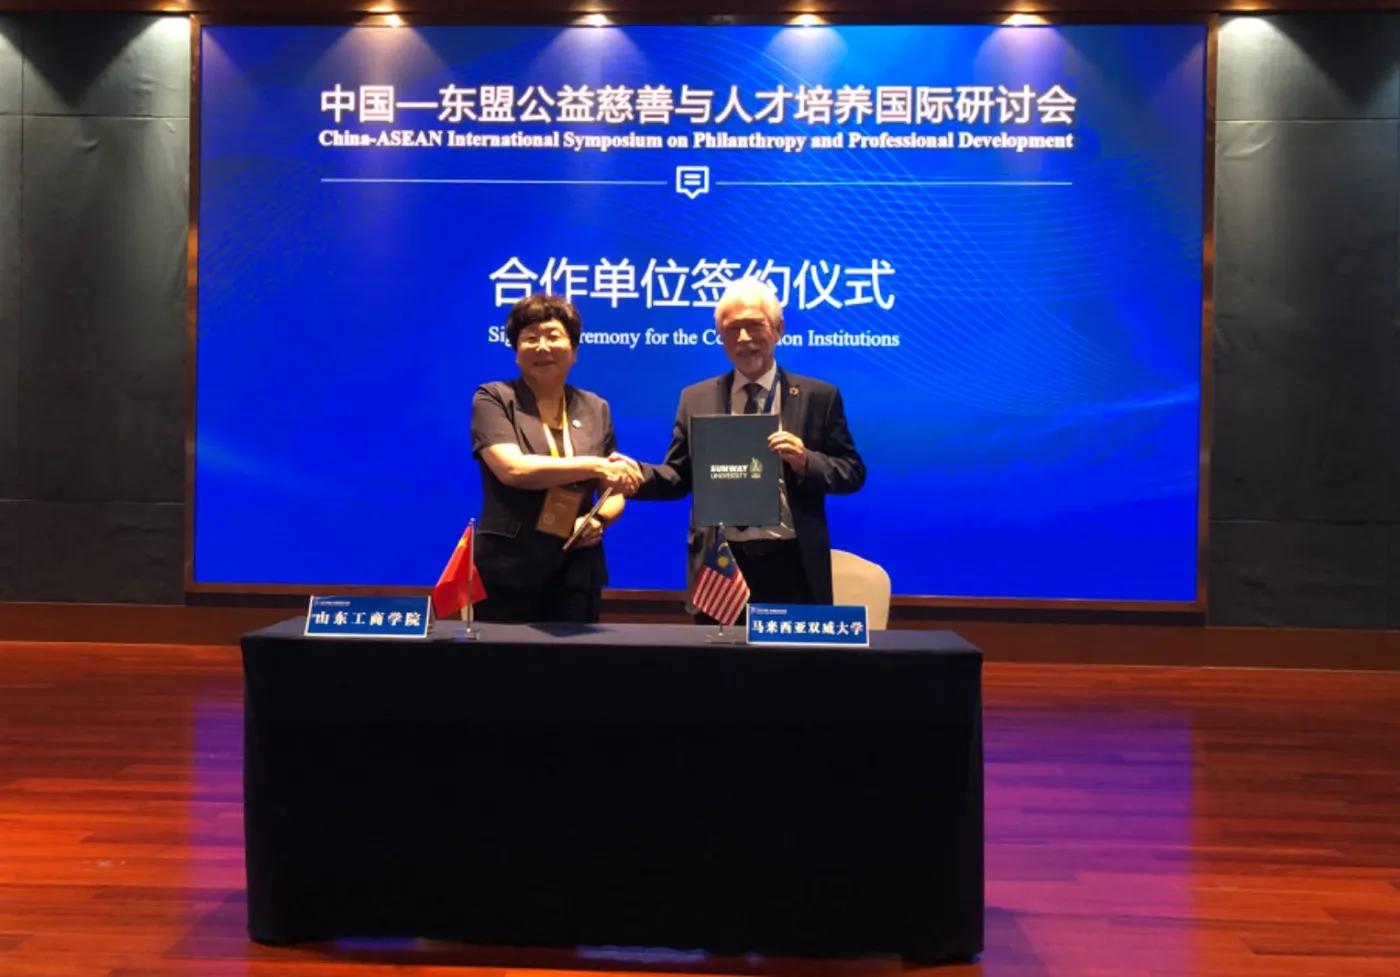 MOU Signing with Wang Yanming, the Vice President of Shandong Technology and Business University.